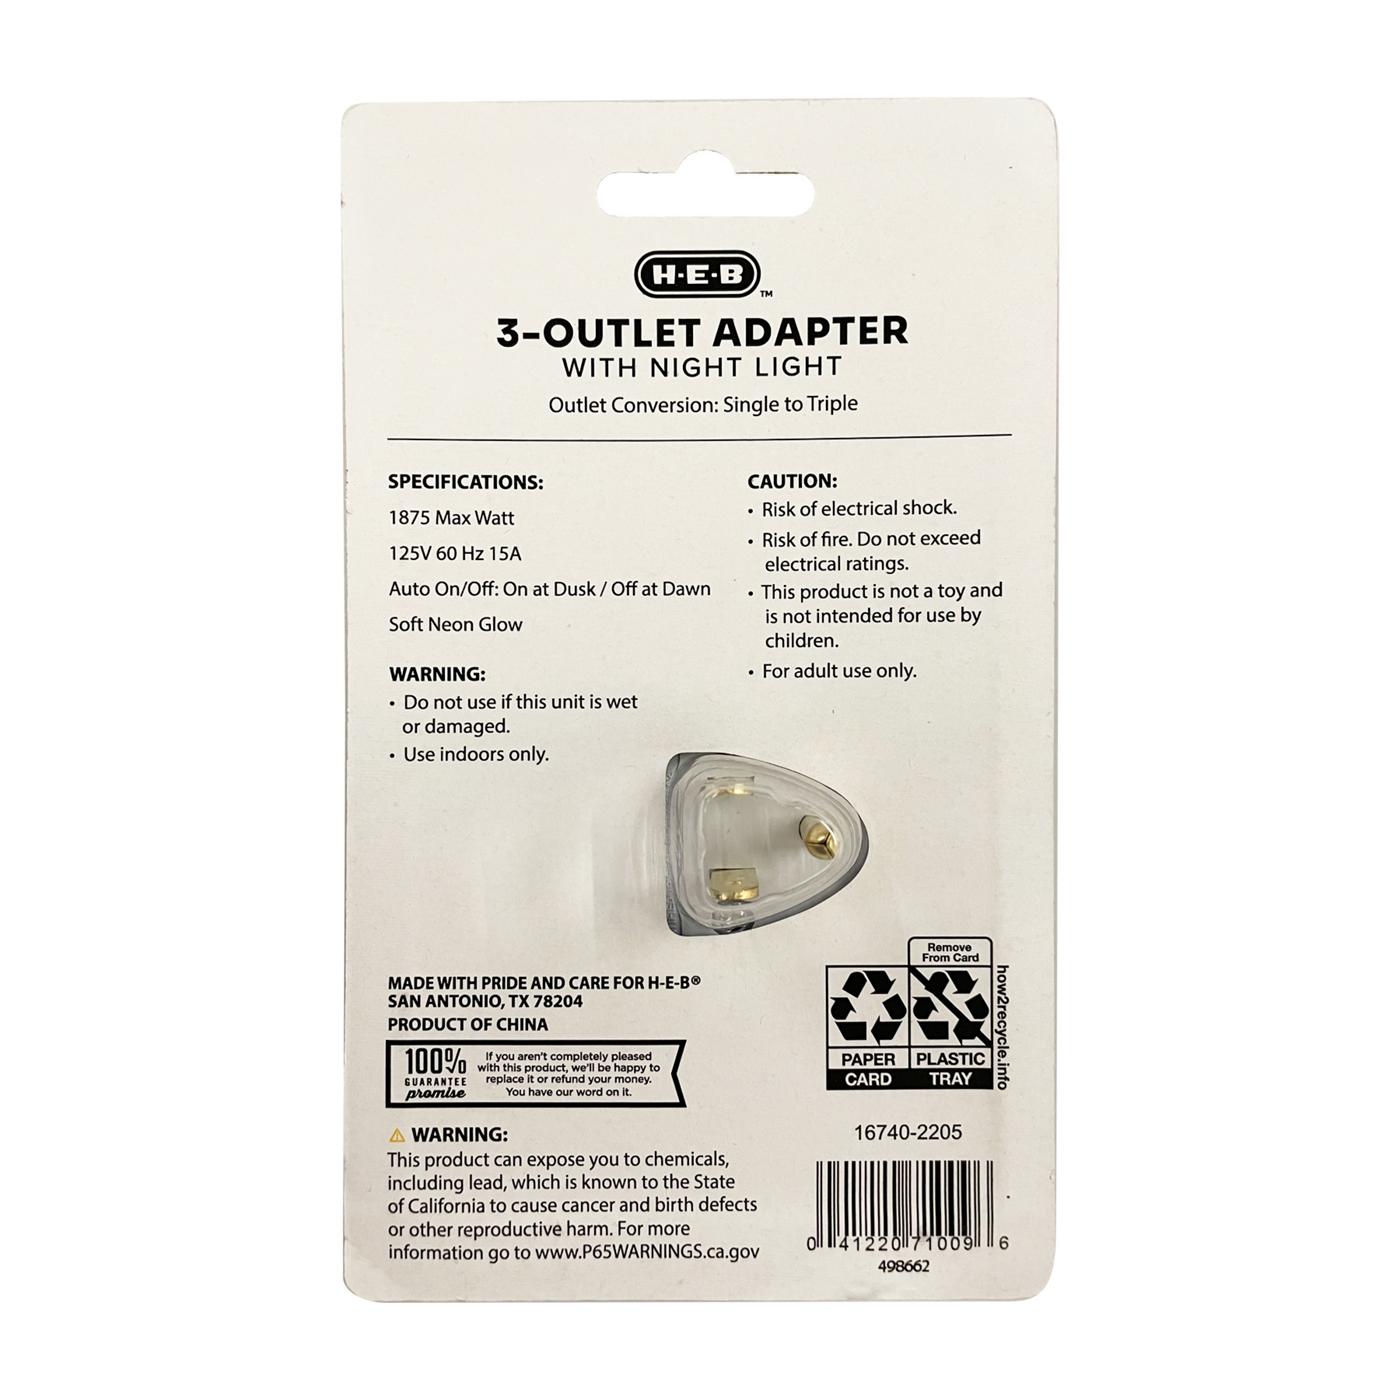 H-E-B 3-Outlet Adapter with Night Light; image 2 of 2